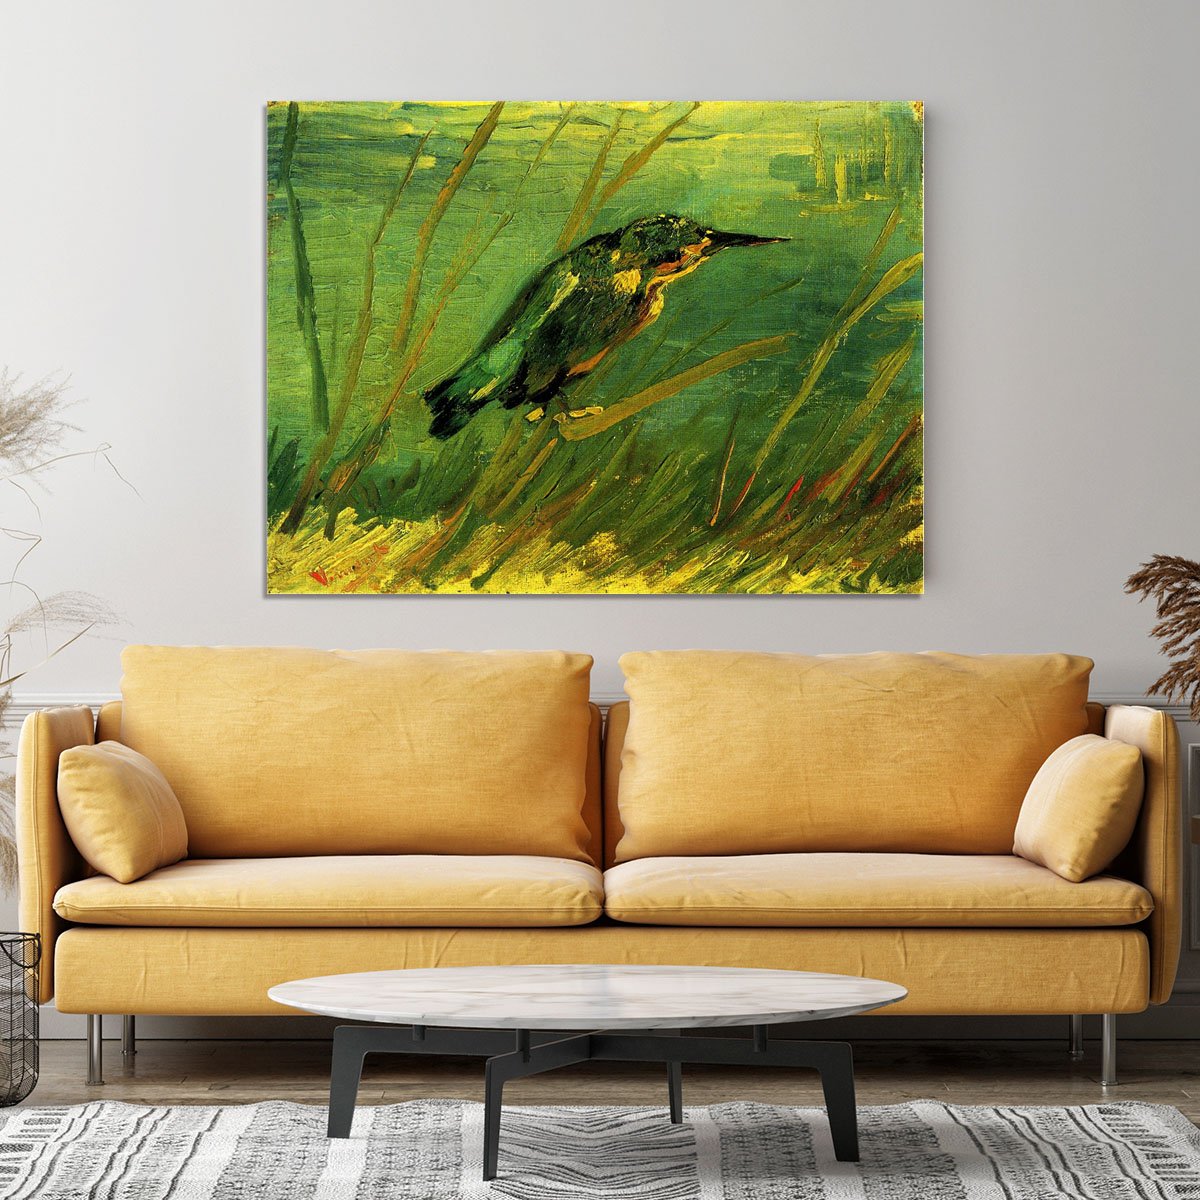 The Kingfisher by Van Gogh Canvas Print or Poster